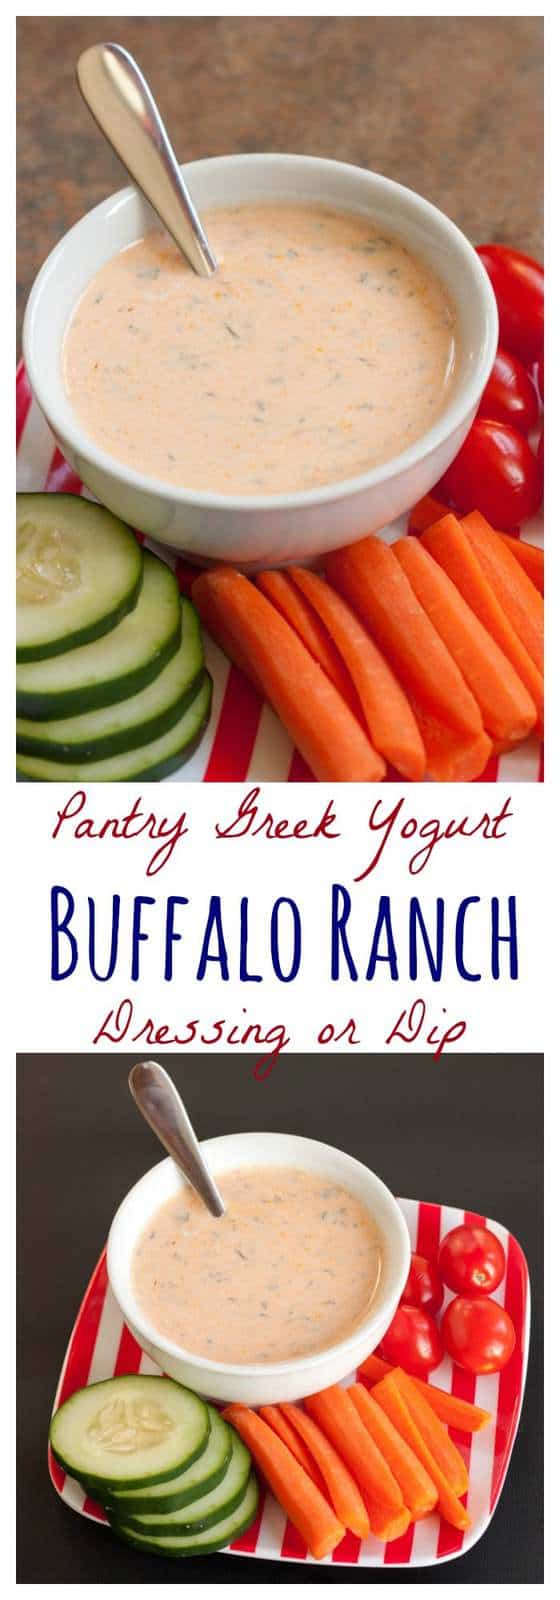 Pantry Greek Yogurt Buffalo Ranch Dressing or Dip - a healthy way to add a little kick to your salads or veggies with basic ingredients in your kitchen | cupcakesandkalechips.com | gluten free